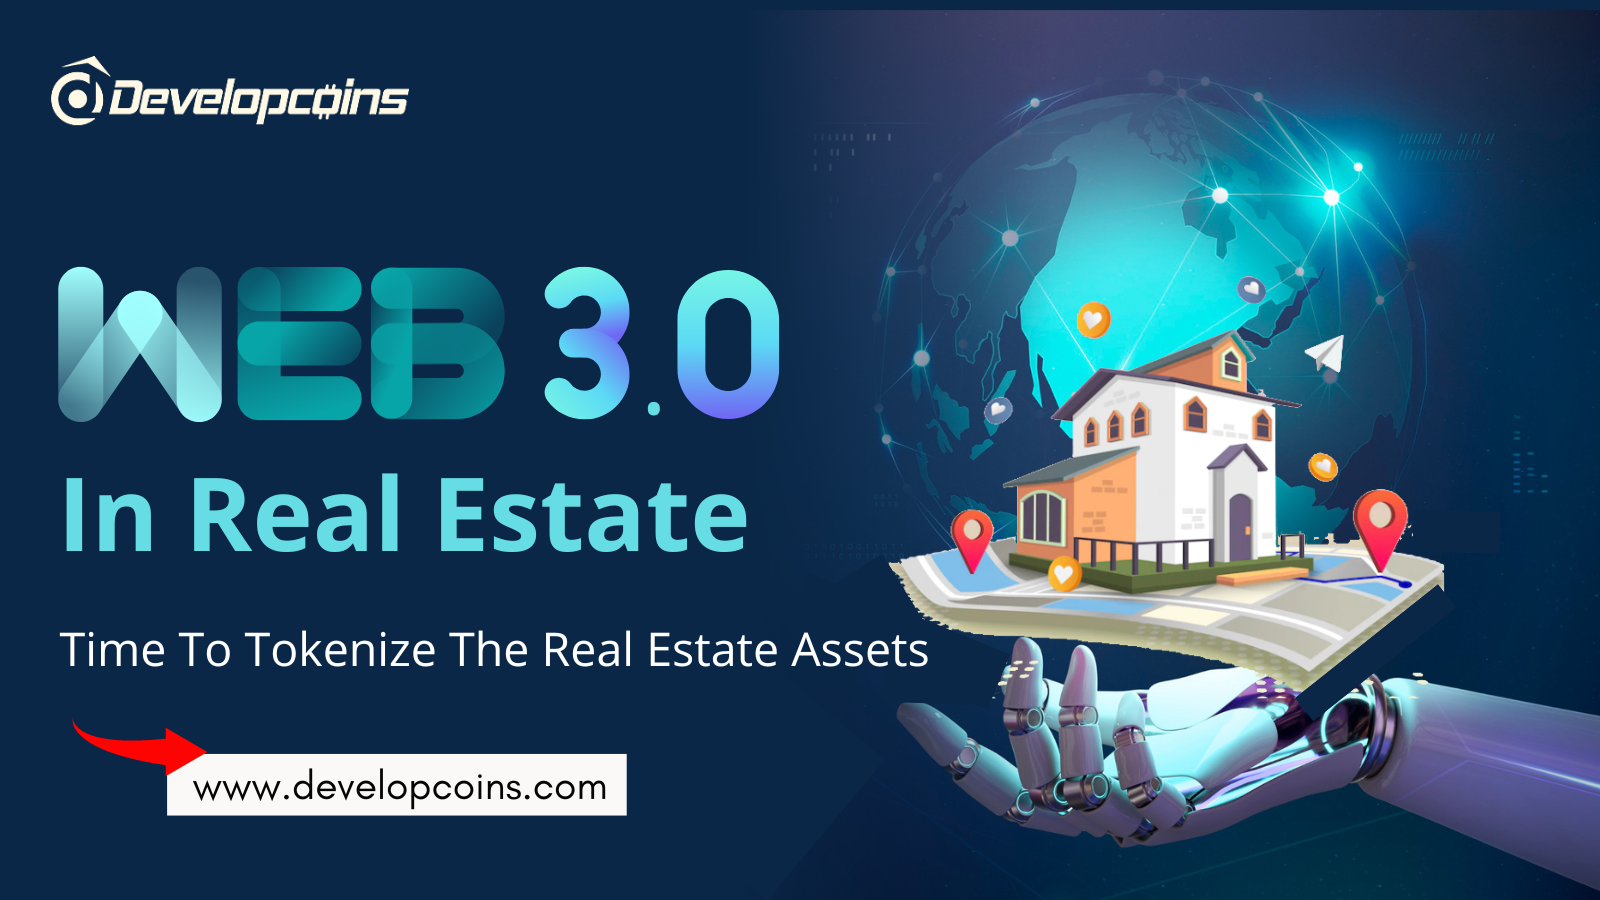 Web 3 In Real Estate - Time To Tokenize The Real Estate Assets